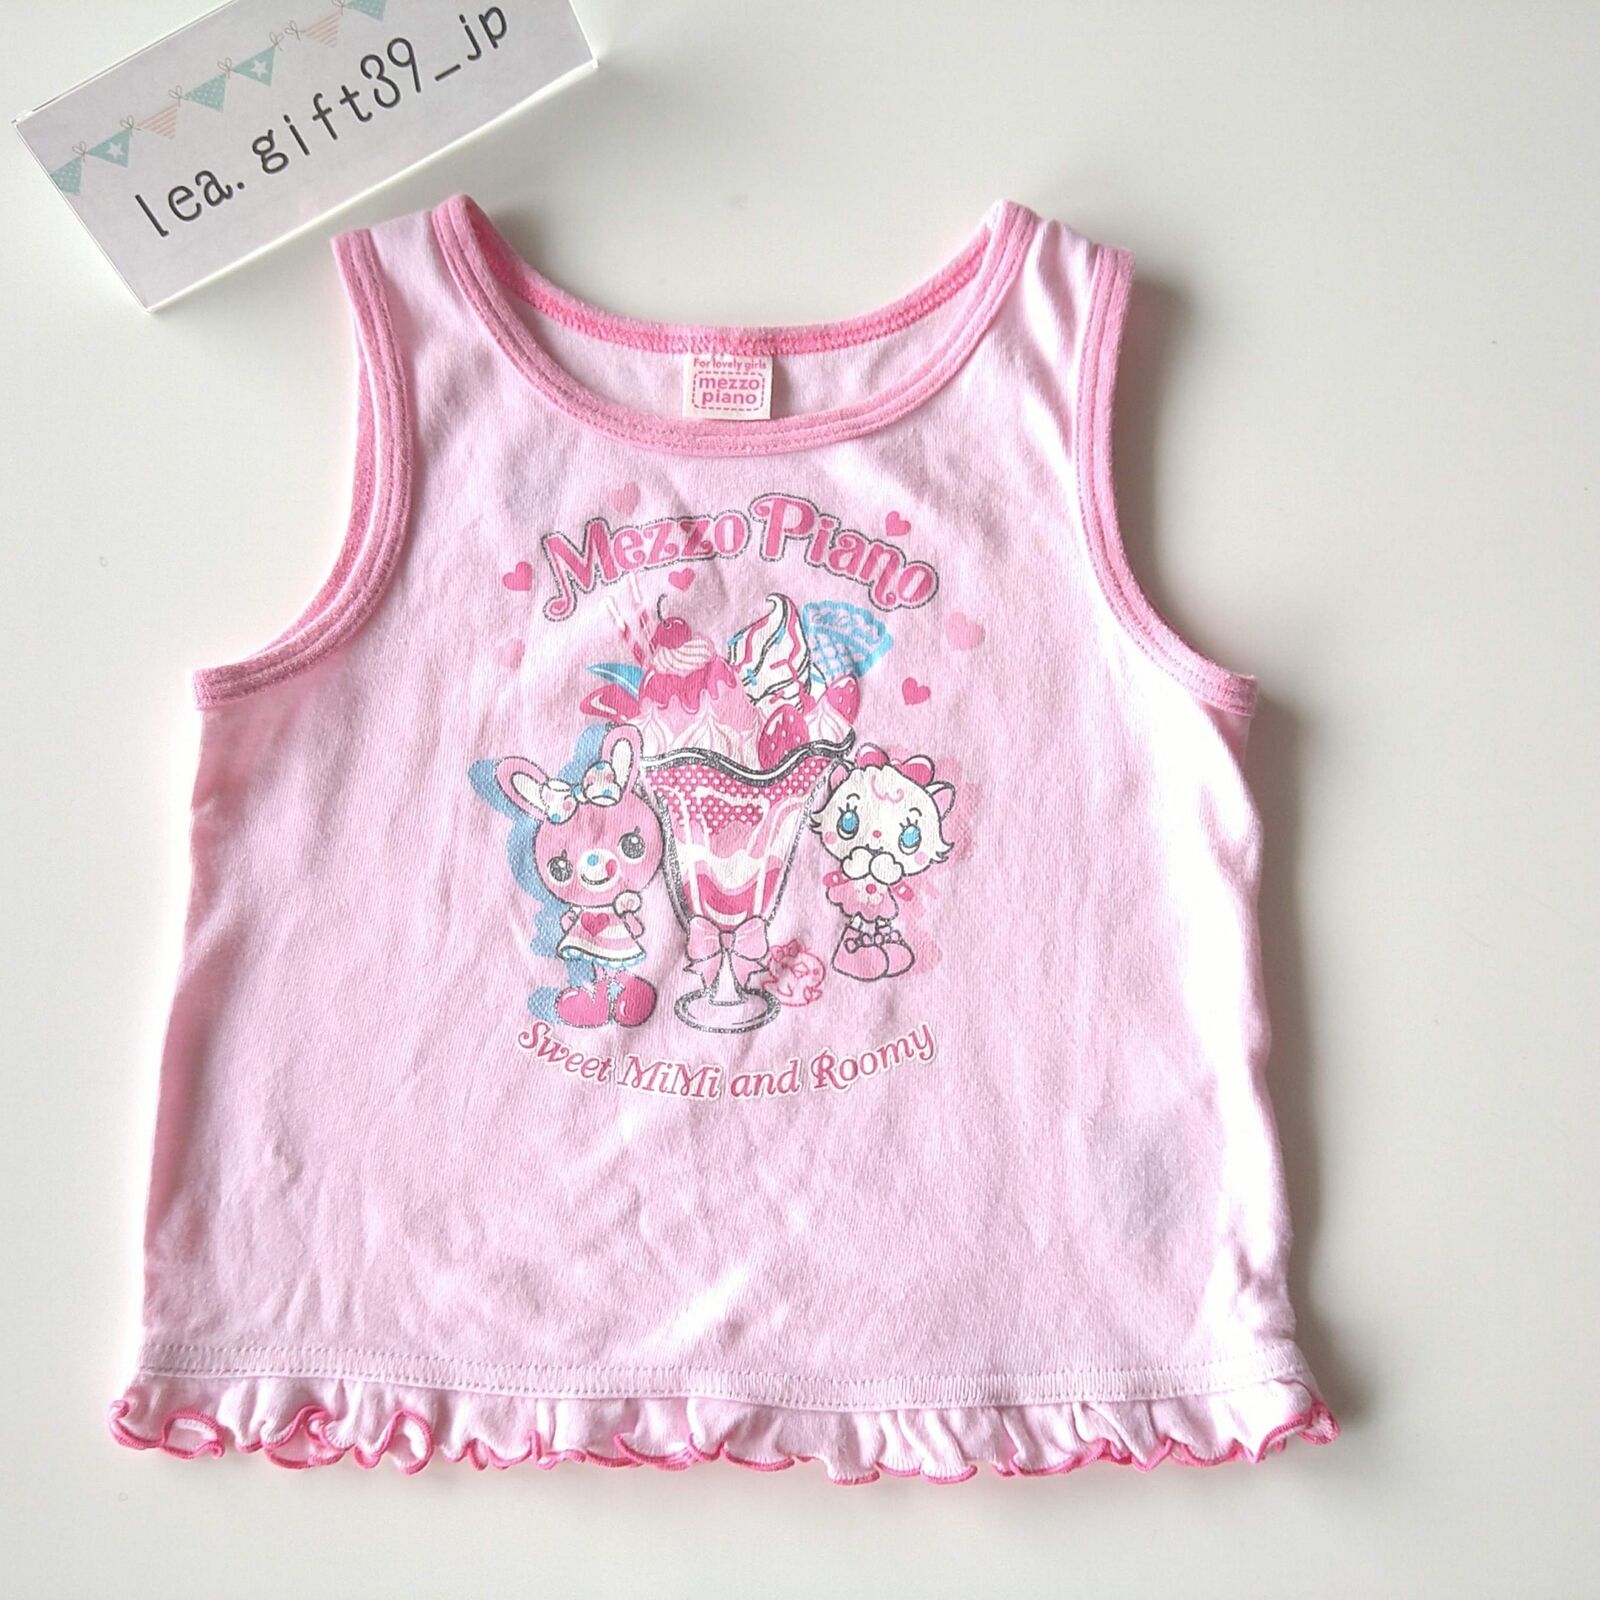 Mezzo Piano Tank Top 120cm No Sleeve Pink MiMi and Roomy Parfait From Japan Used